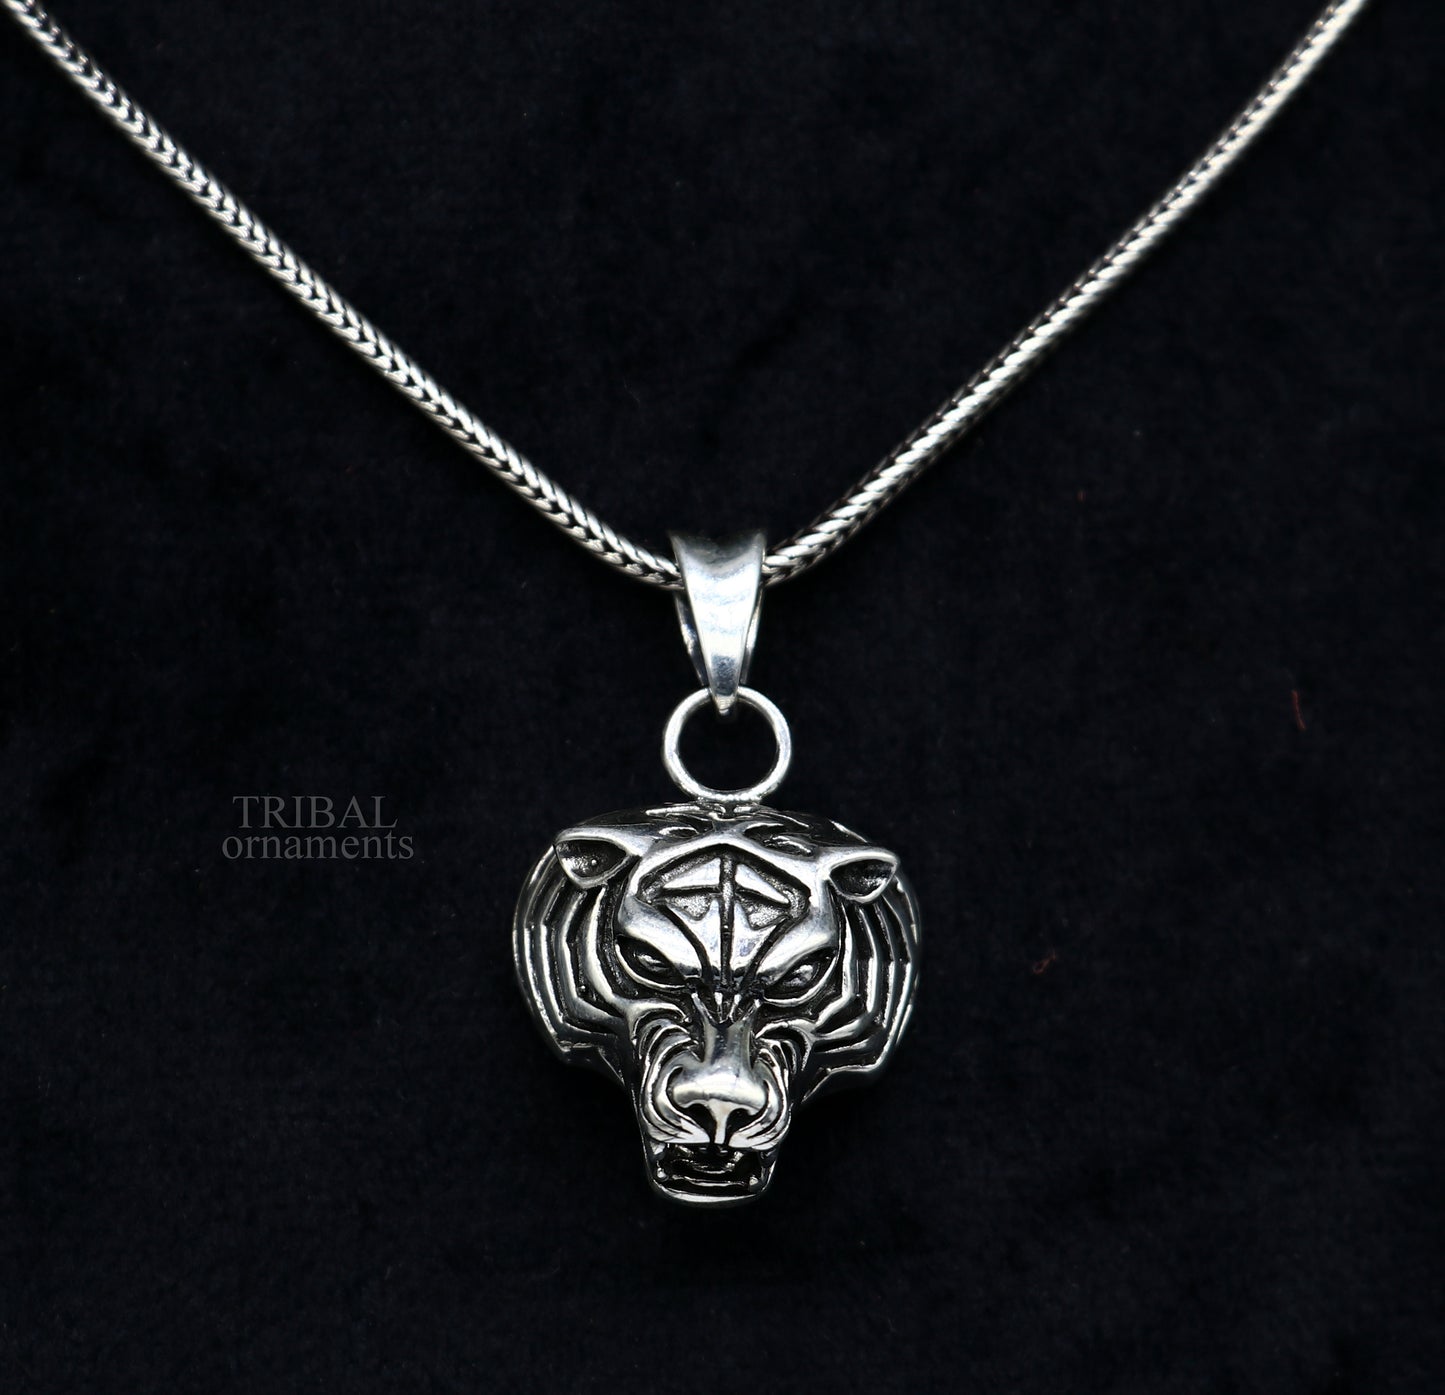 Elegant divine 925 sterling silver handmade tiger face design pendant solid pendant, best unisex gifting jewelry from india ssp1458 - TRIBAL ORNAMENTS